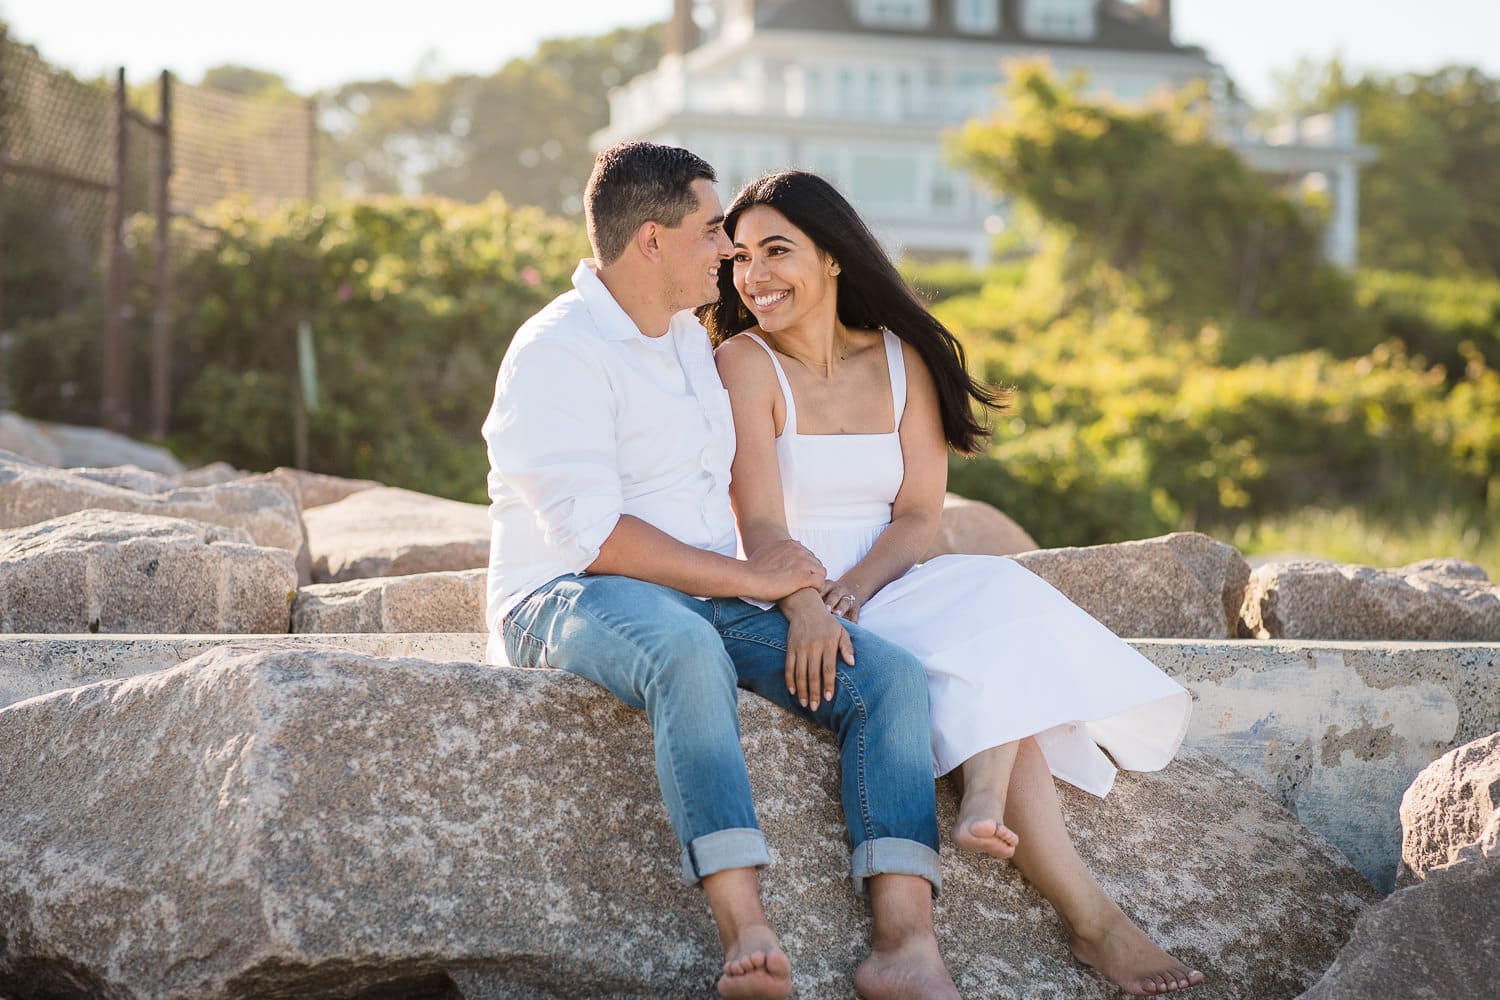 A couple in white at their East Beach Westerly Rhode Island engagement photo session